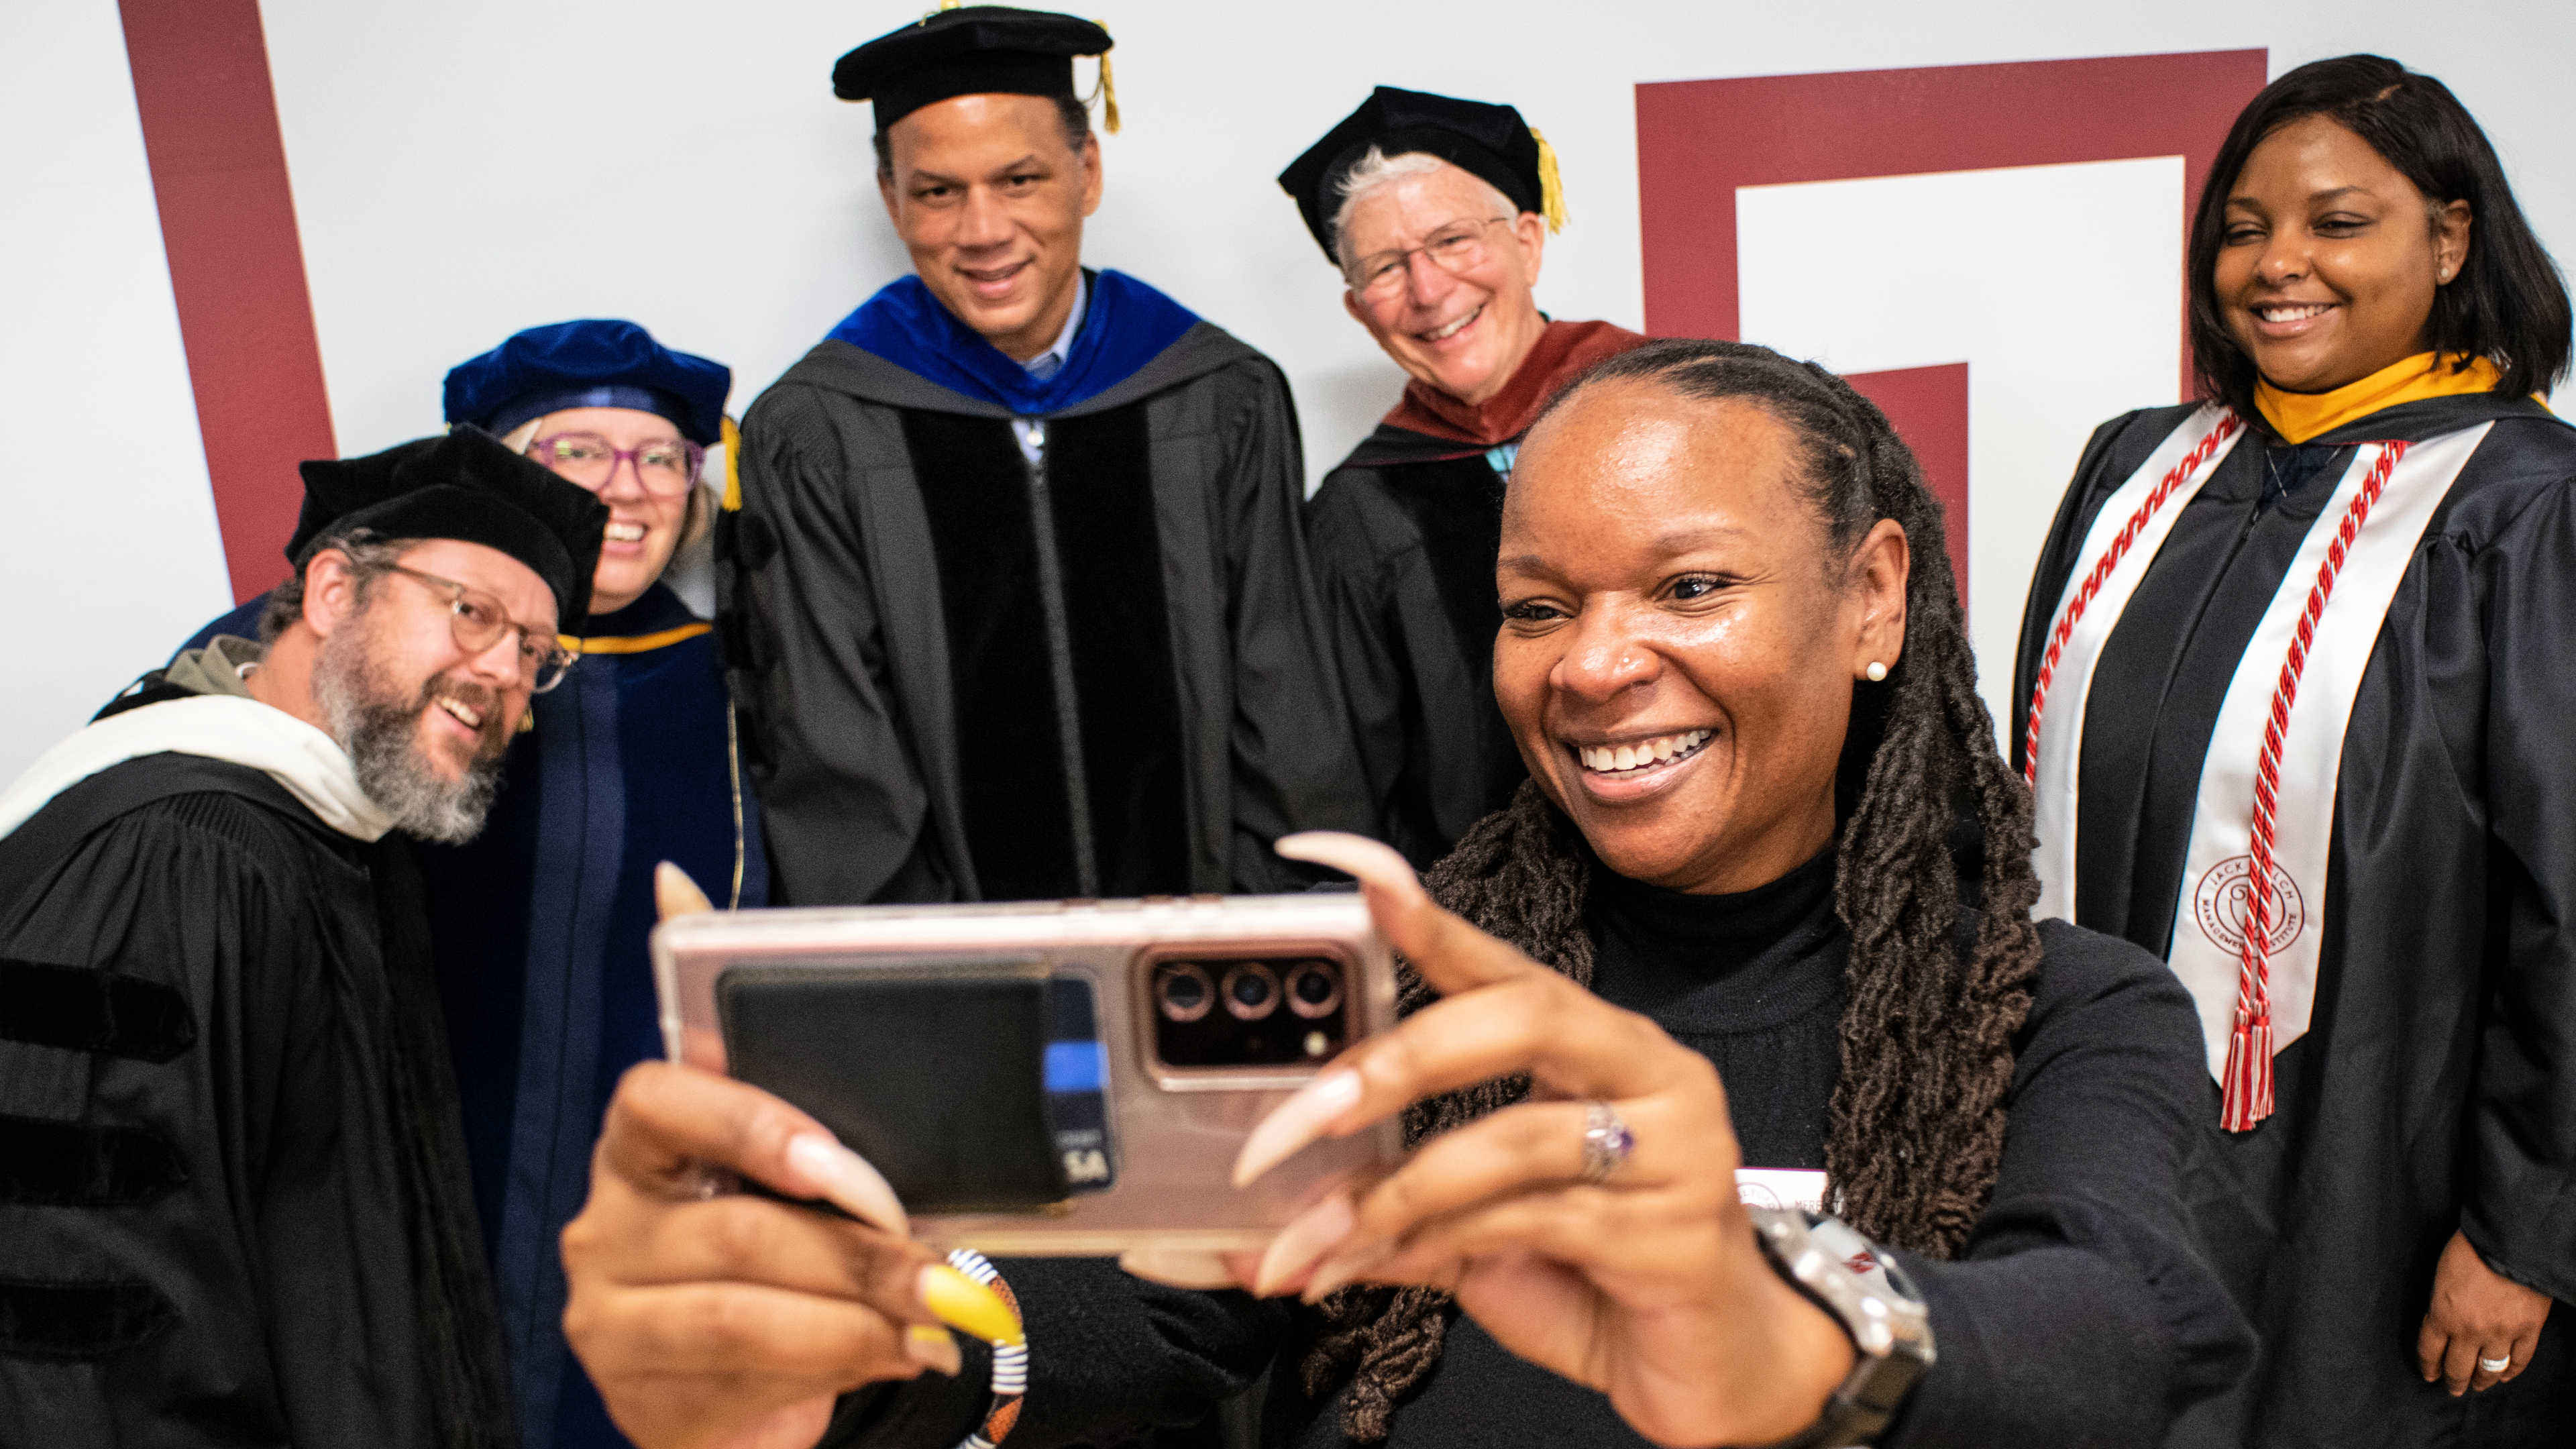 A staff member takes a selfie with a group of speakers and attendees, including the President and the Provost and the alumni speaker.